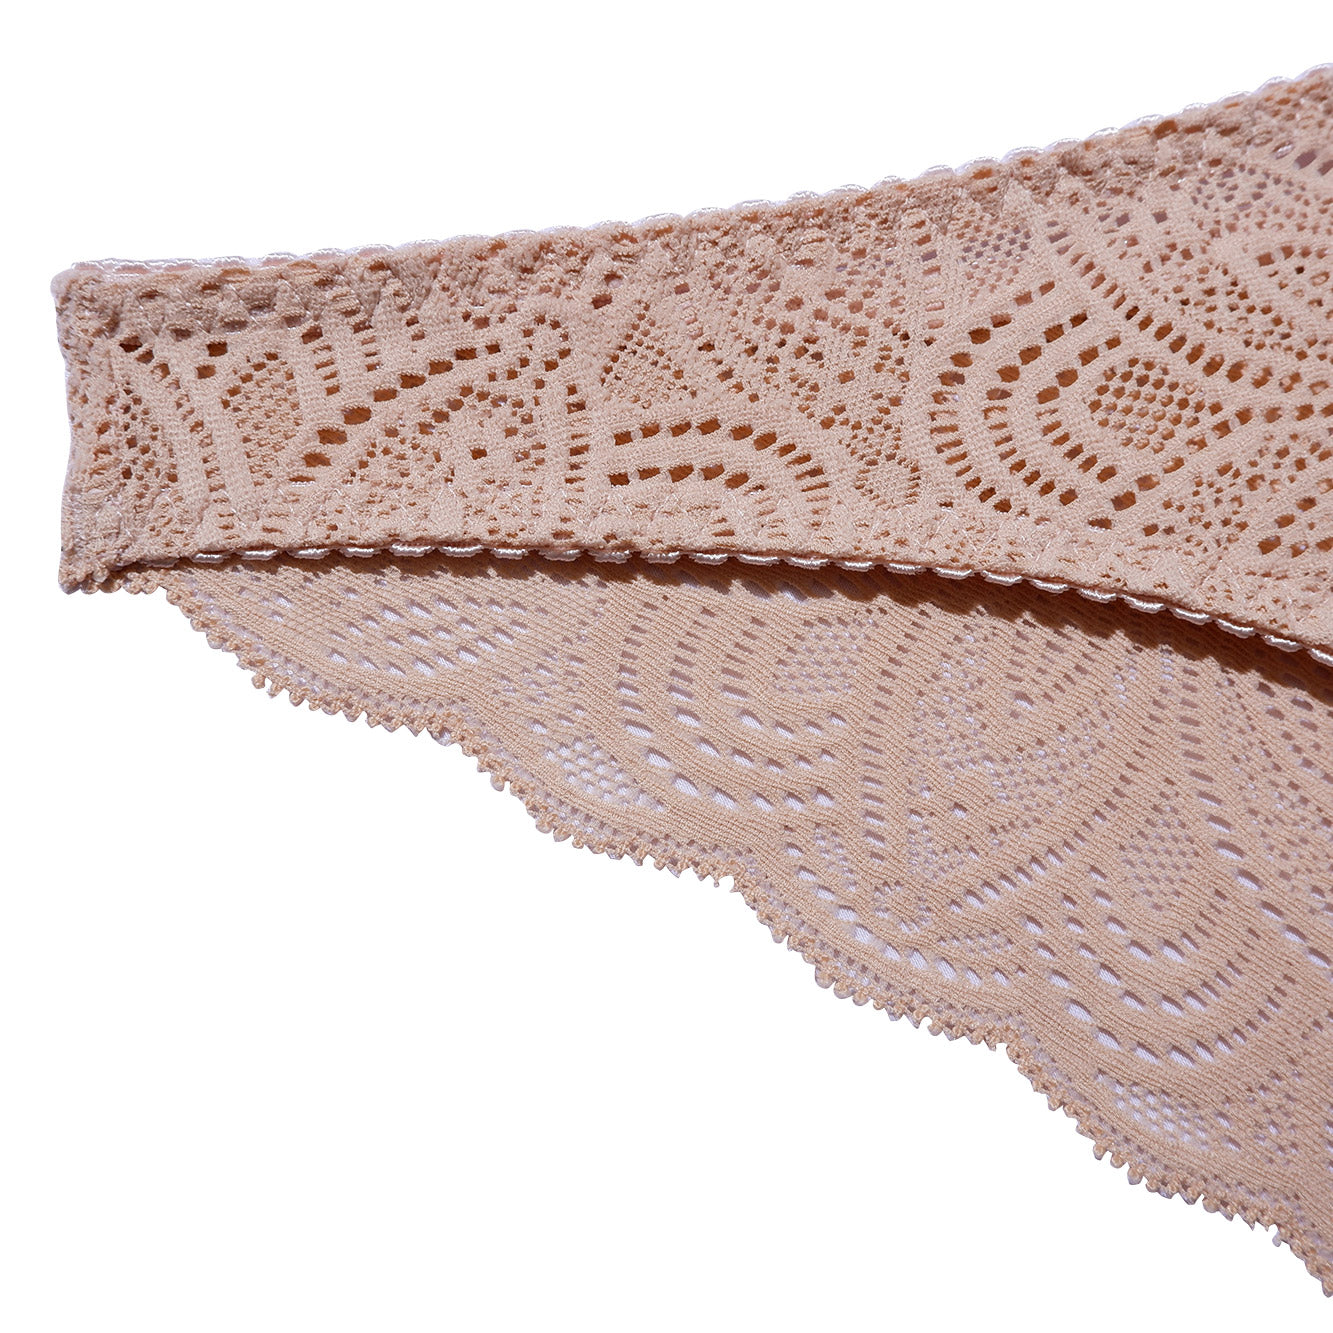 Our Luna Briefs are made in soft lace with delicate scalloped edges, for a light and romantic look.